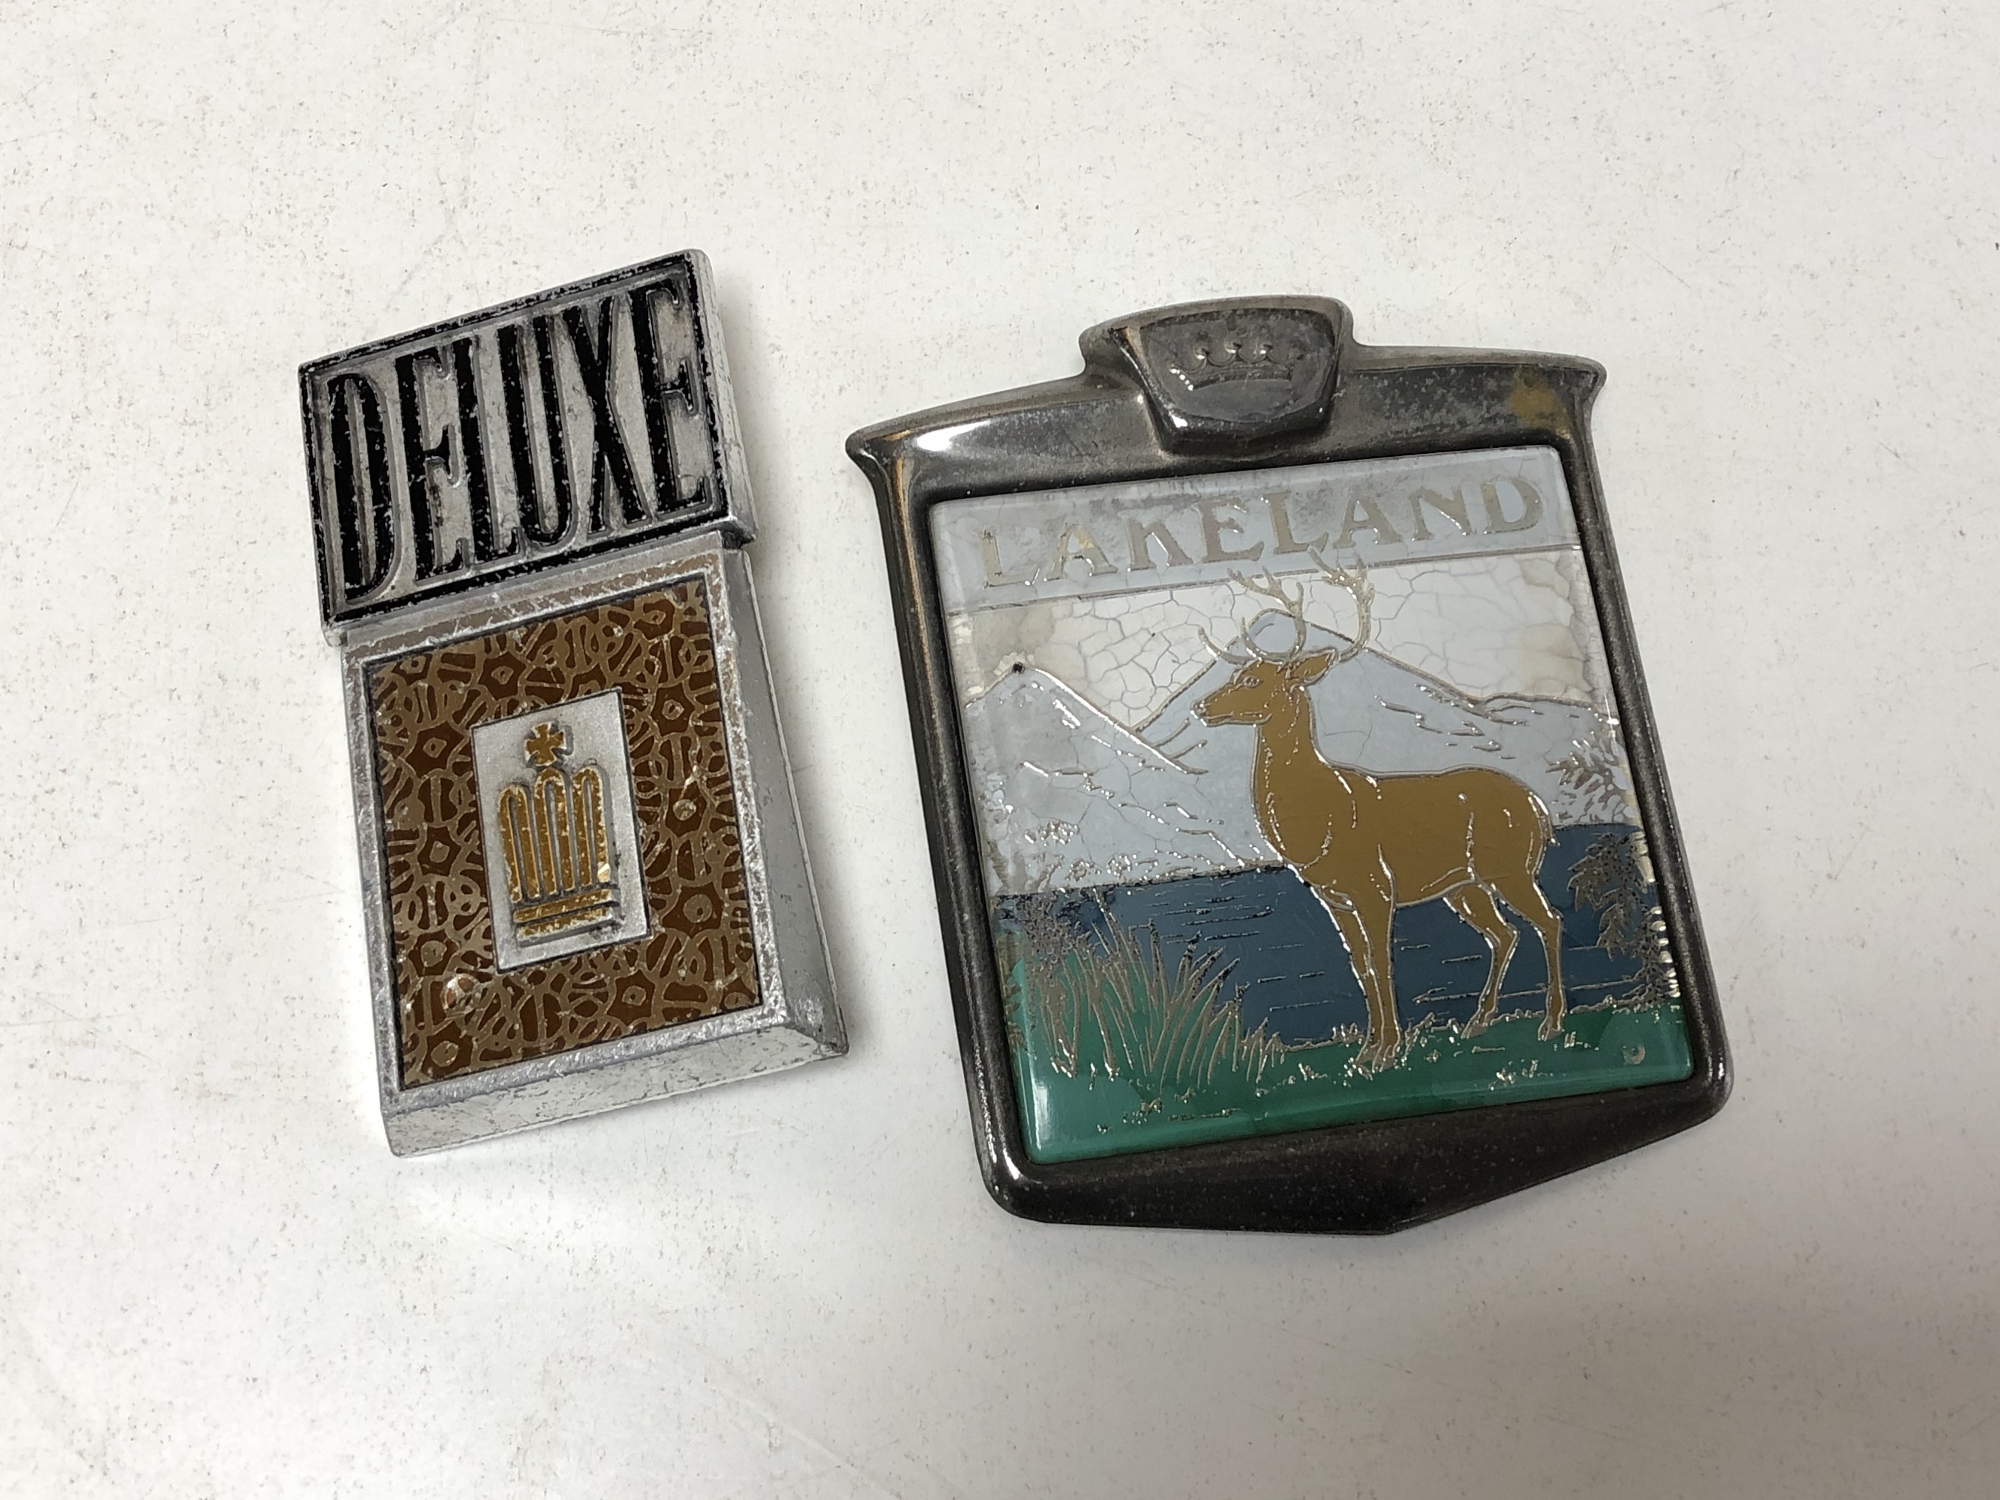 Two vintage car badges - Lakeland and Deluxe